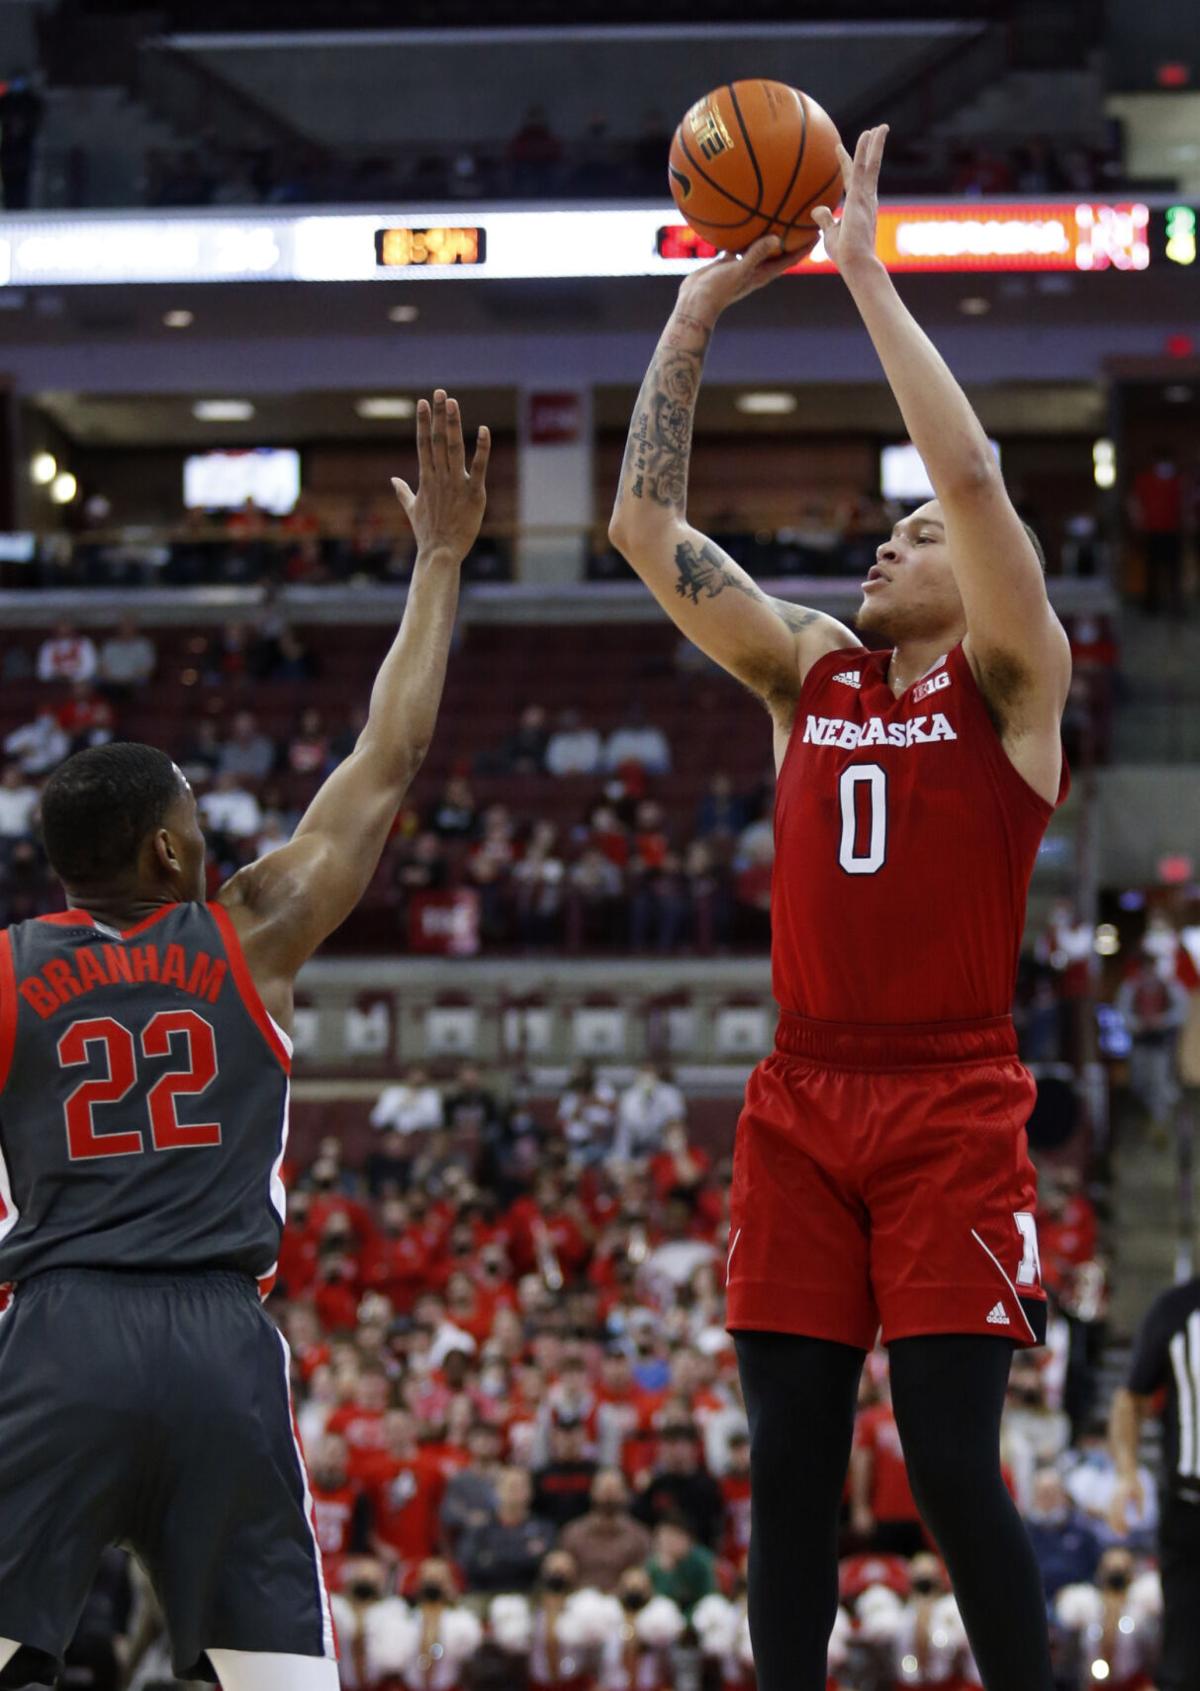 Bryce McGowens named AP Big Ten newcomer of the year; OSU's Branham wins  conference award